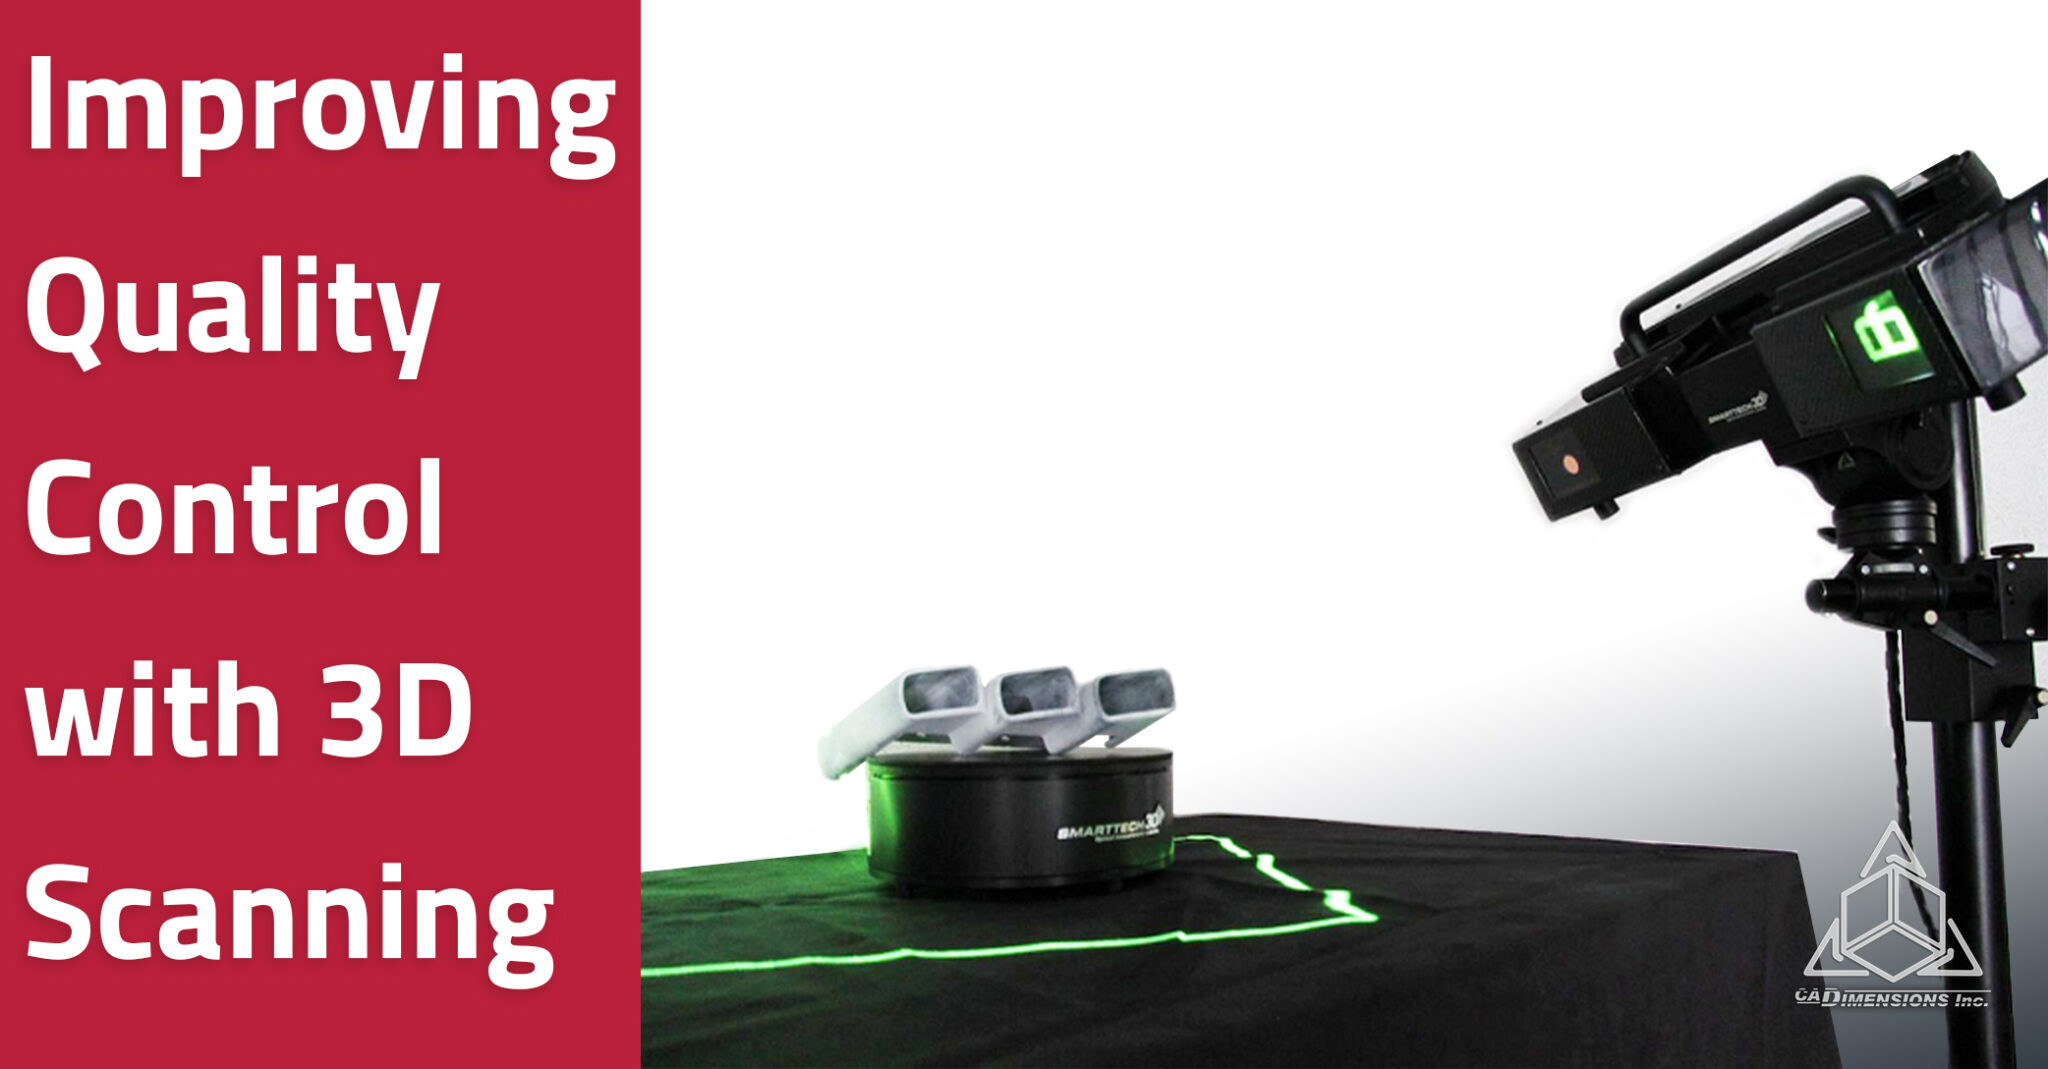 improving quality control with 3d scanning - blog 7-2019 cadimensions smarttech3d scanners